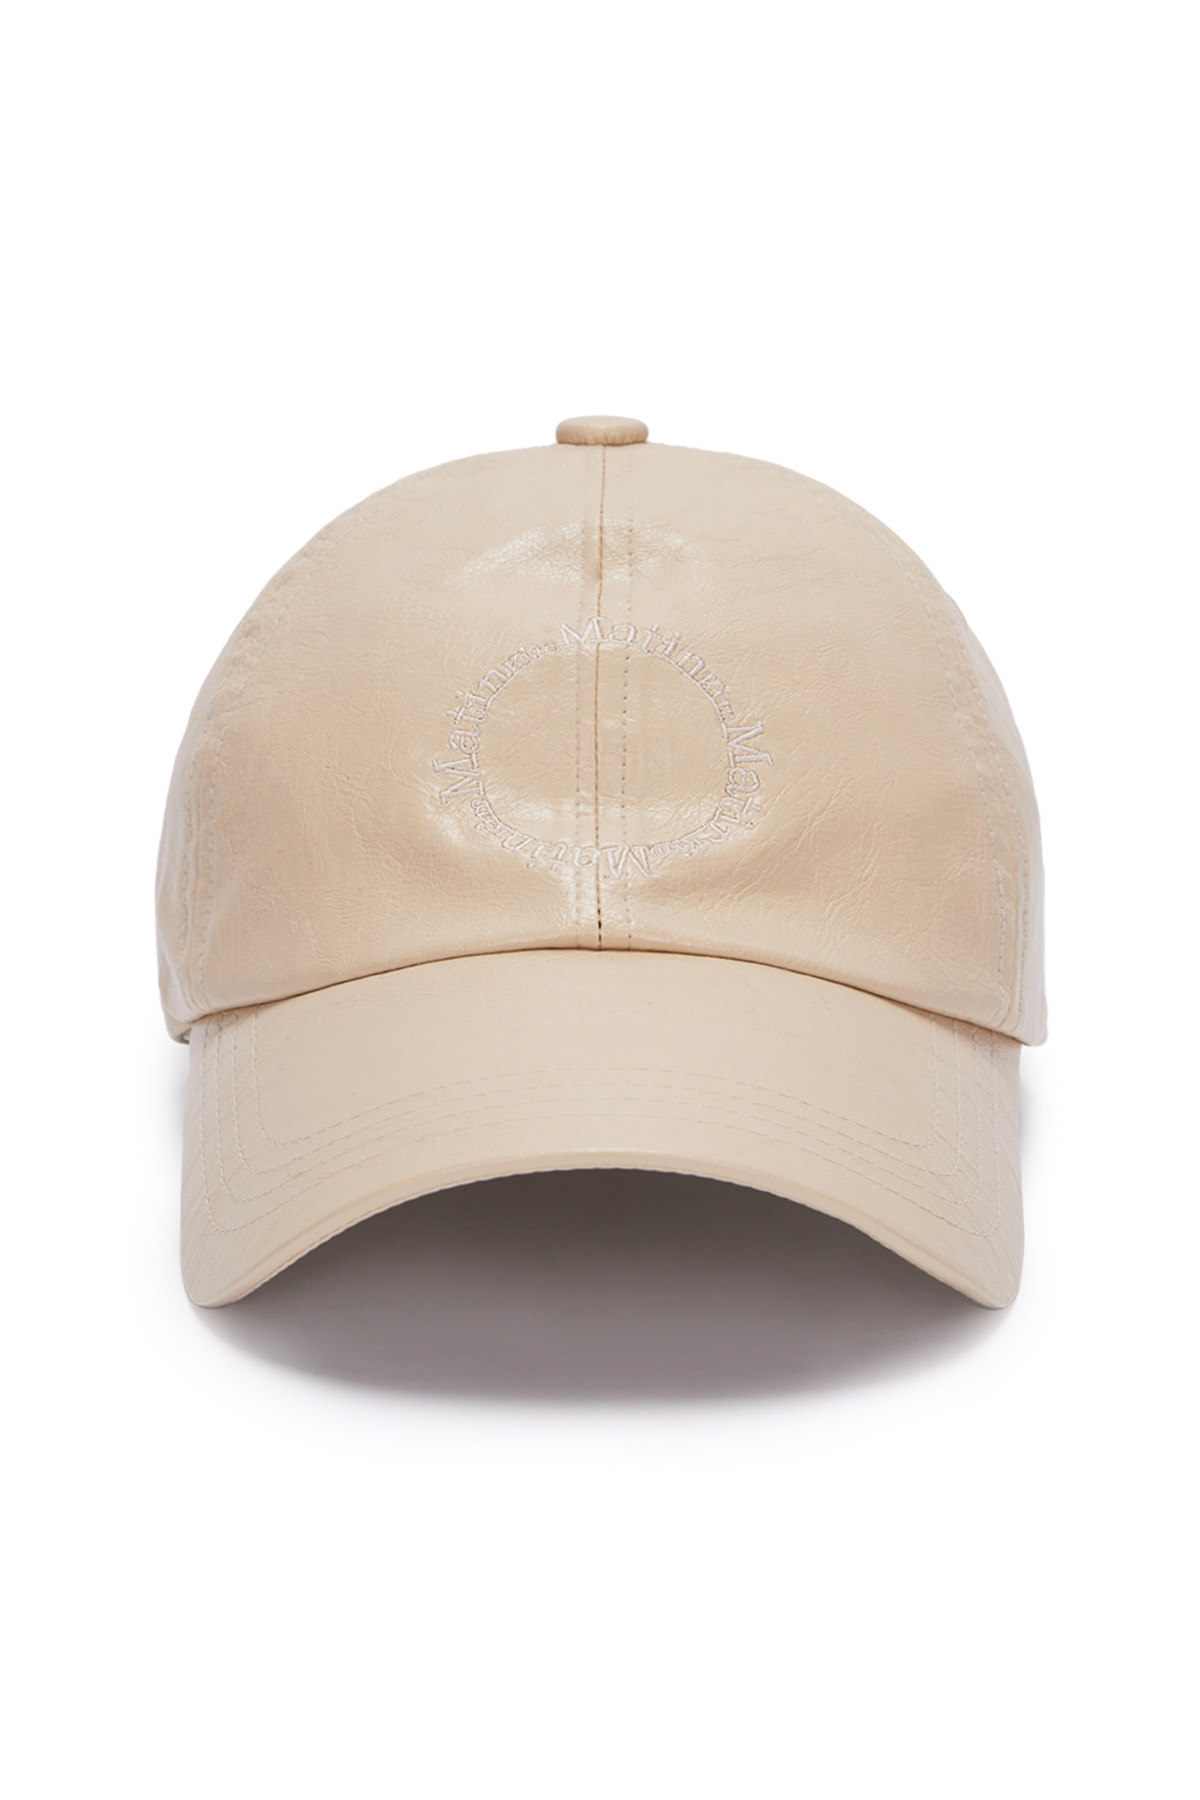 GLOSSY LEATHER BALL CAP IN IVORY